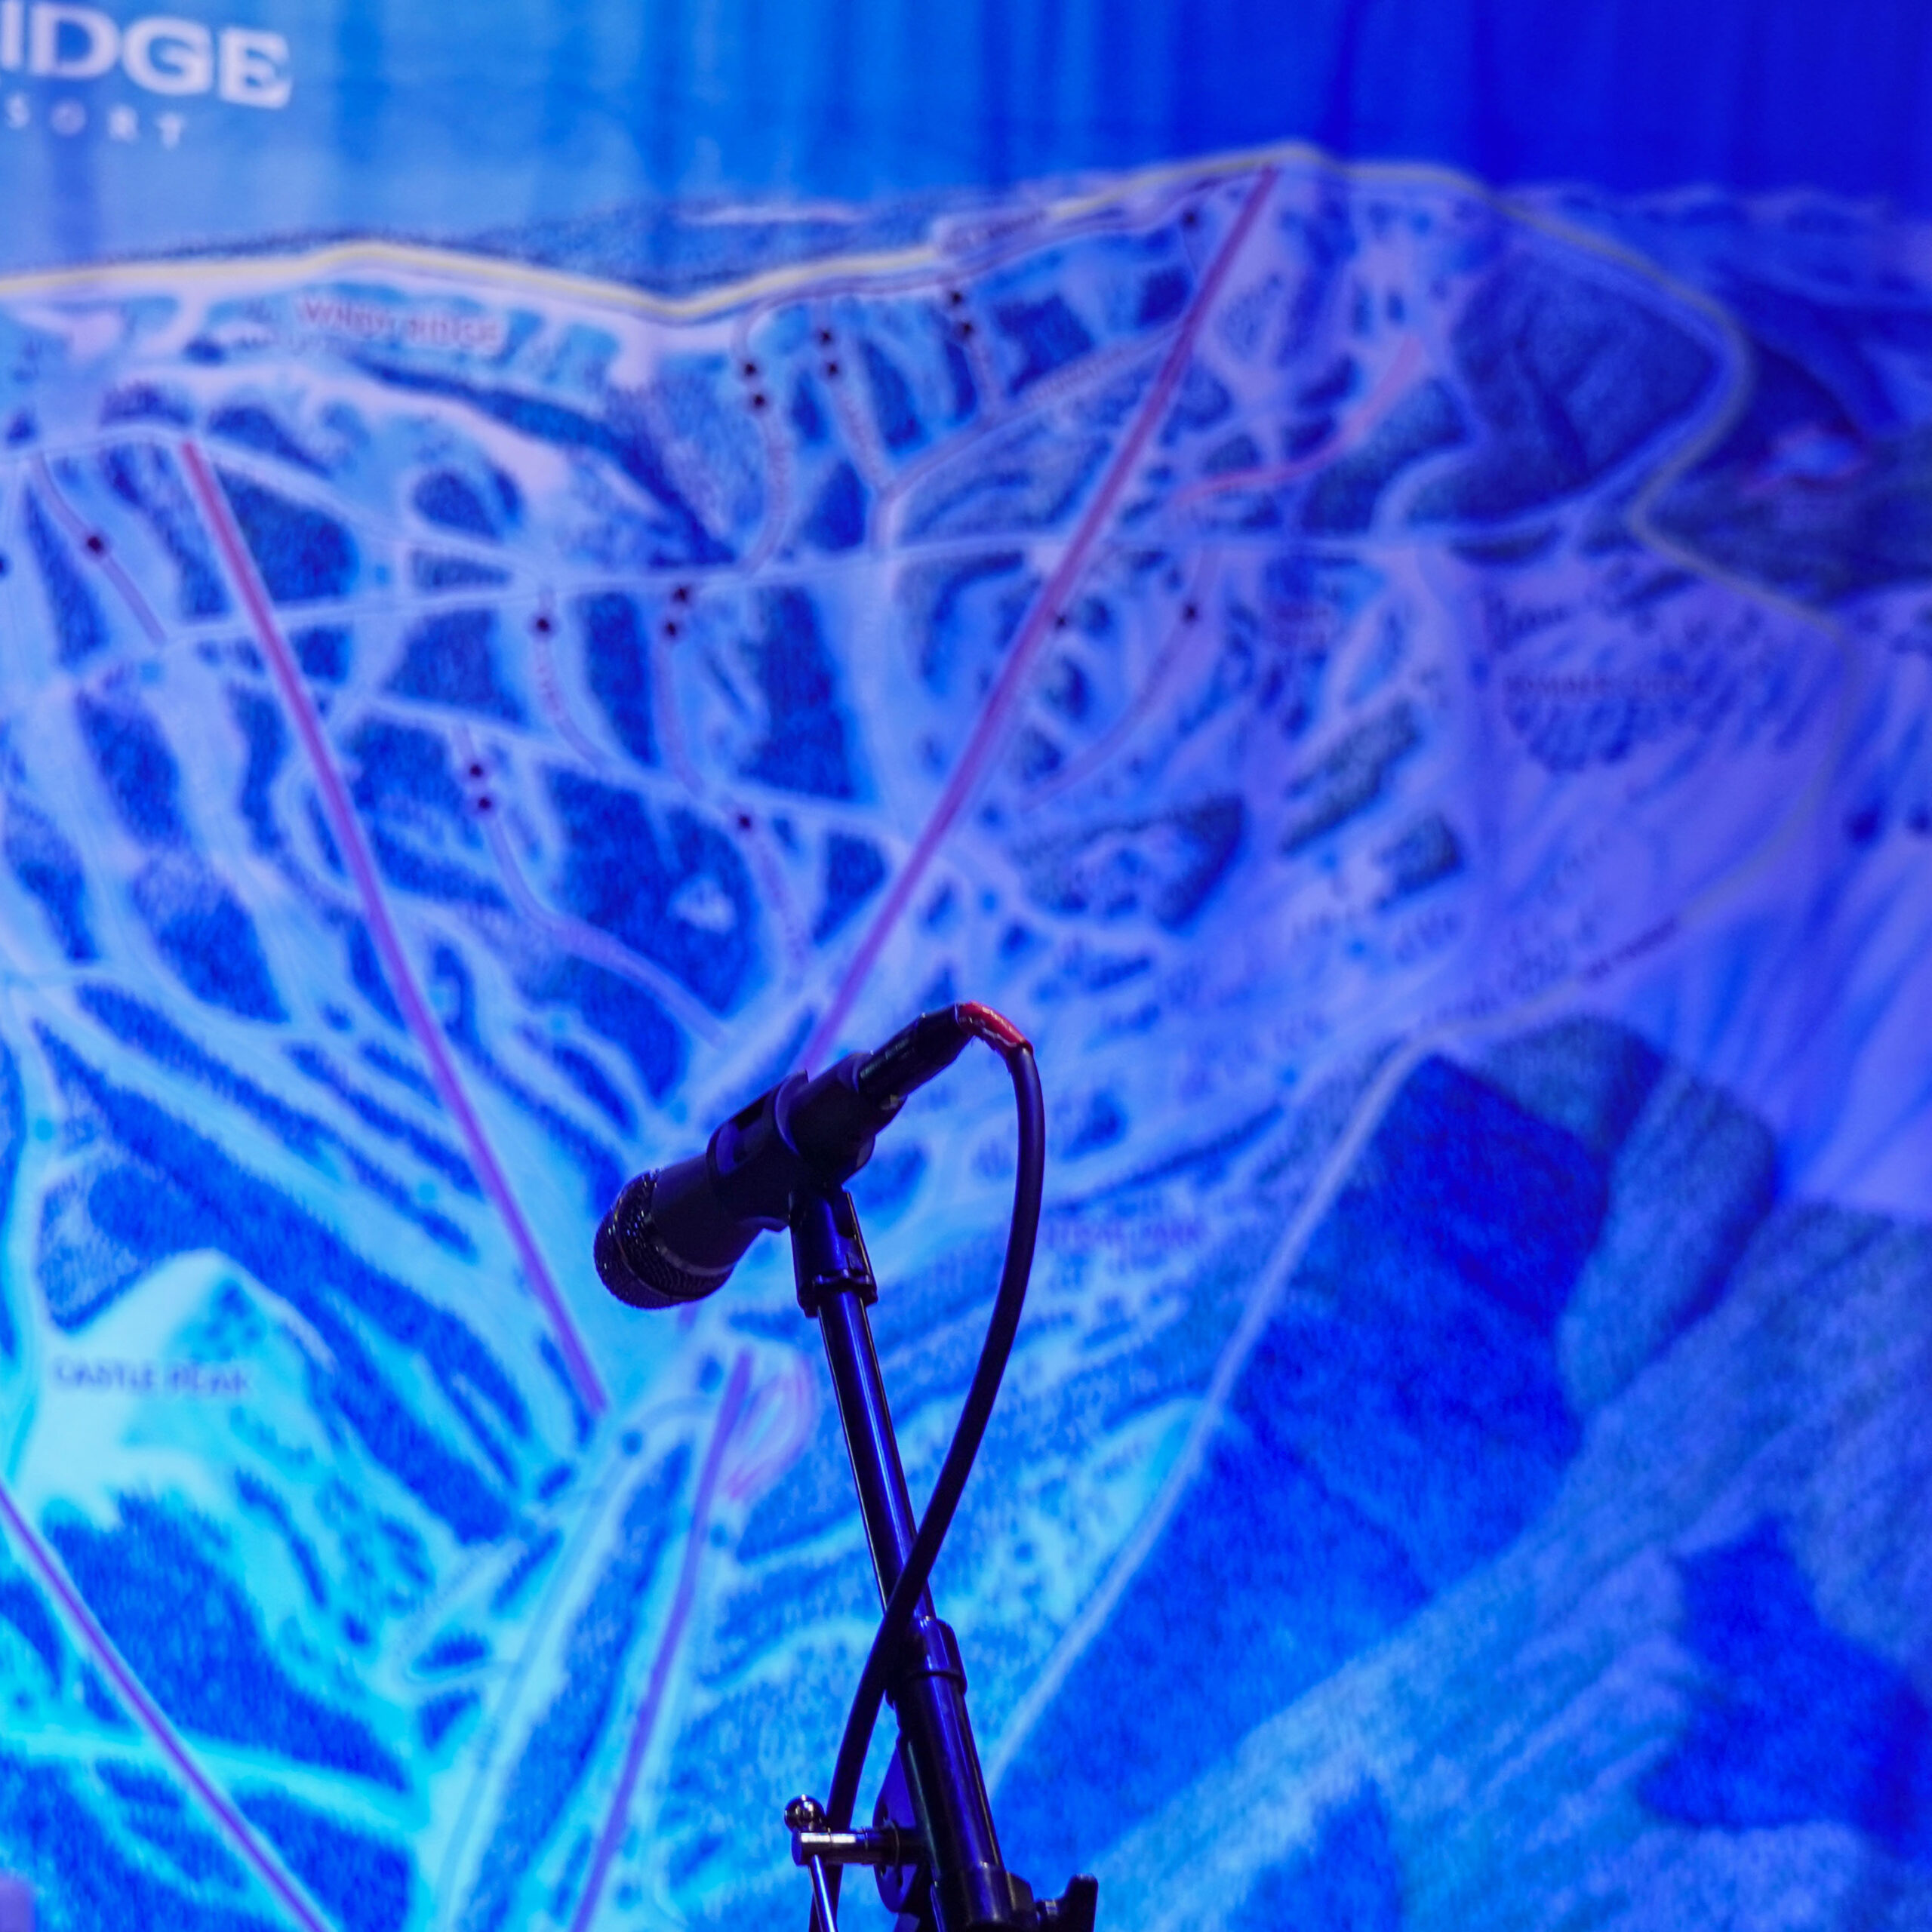 Close up of microphone with Mission Ridge trail map behind bathed in blue light